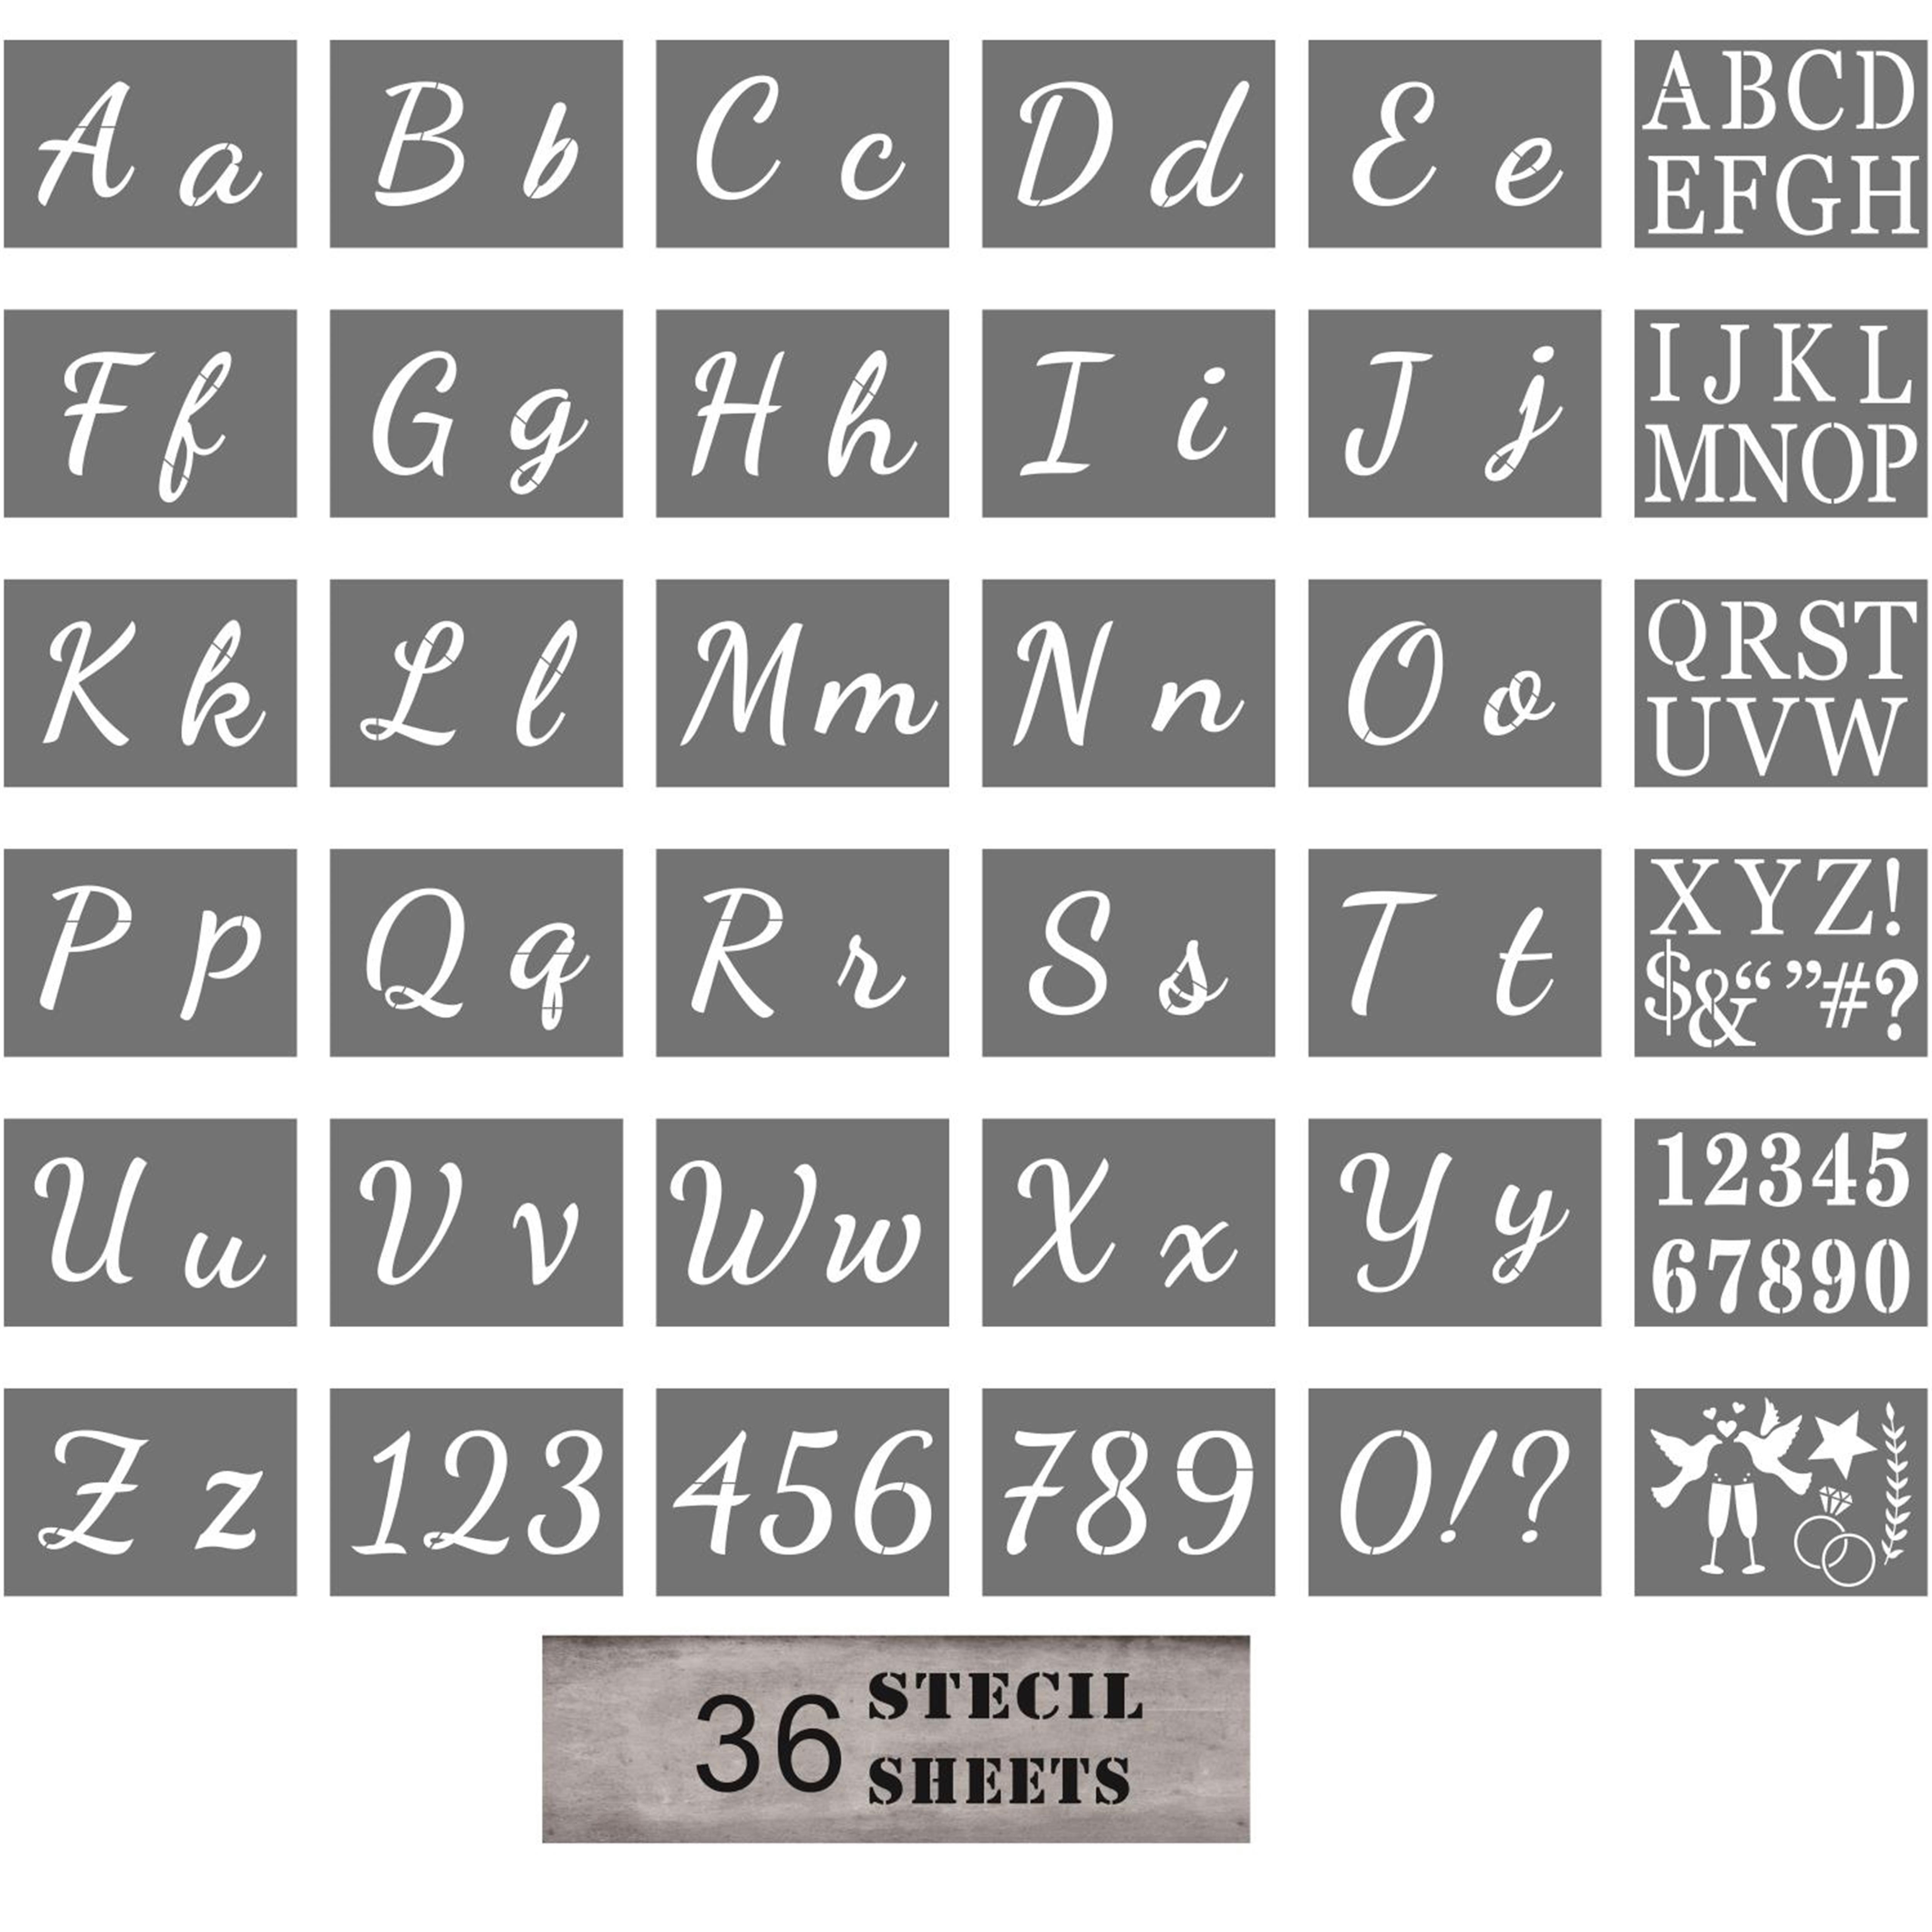 42pcs Reusable Washable Pp Letter And Number Stencils For Painting On Wood,  Scrapbooking, Fabric, Walls, Doors Etc